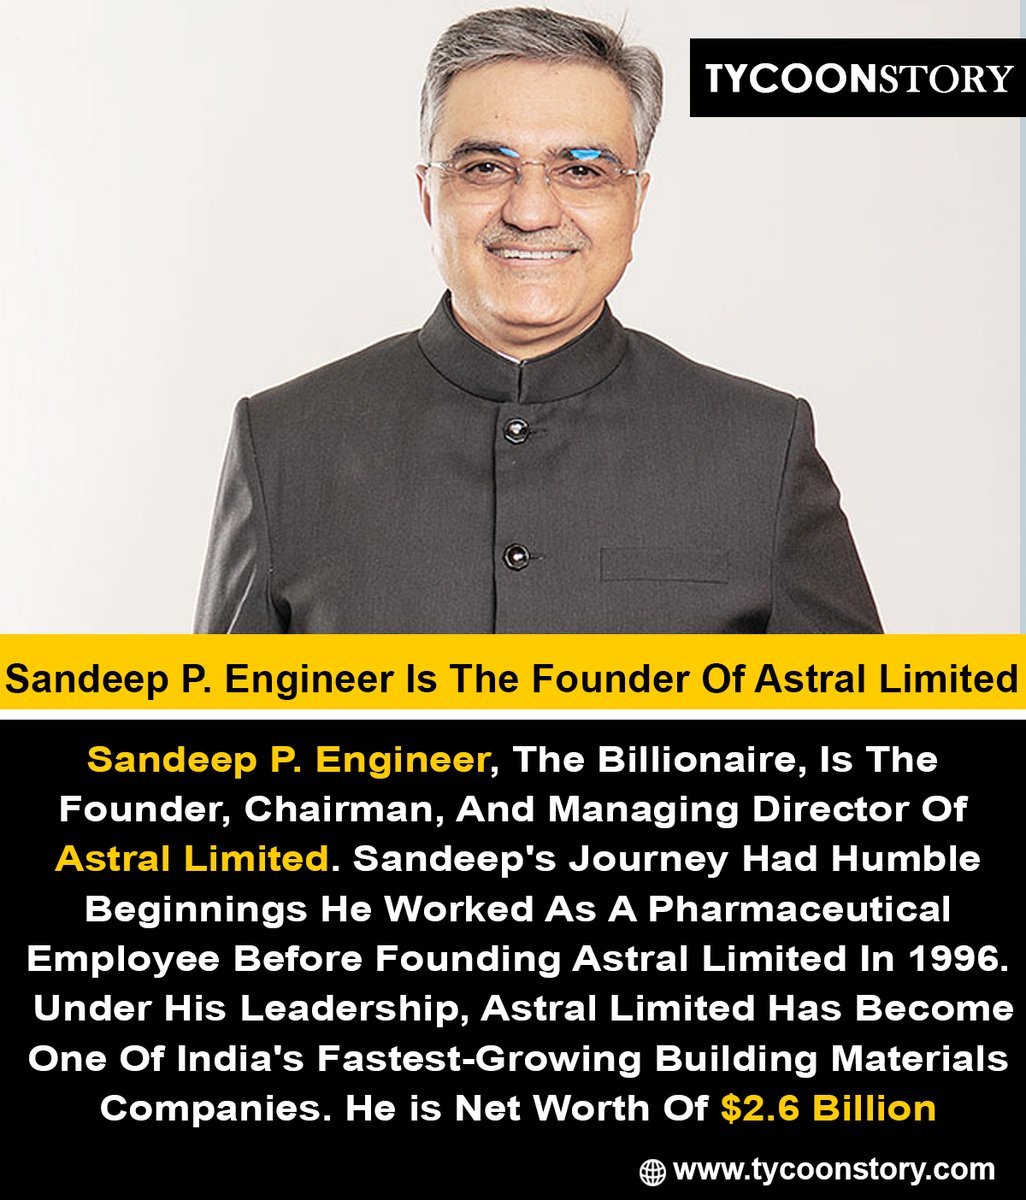 Sandeep Engineer Is The Founder Of Astral Limited

#SandeepEngineer #AstralLimited #AstralFounder #AstralCEO #AstralInnovator #AstralPipes #AstralPlumbing #AstralInfrastructure
#AstralEngineering #AstralSuccess 
@AstralLimited  
tycoonstory.com